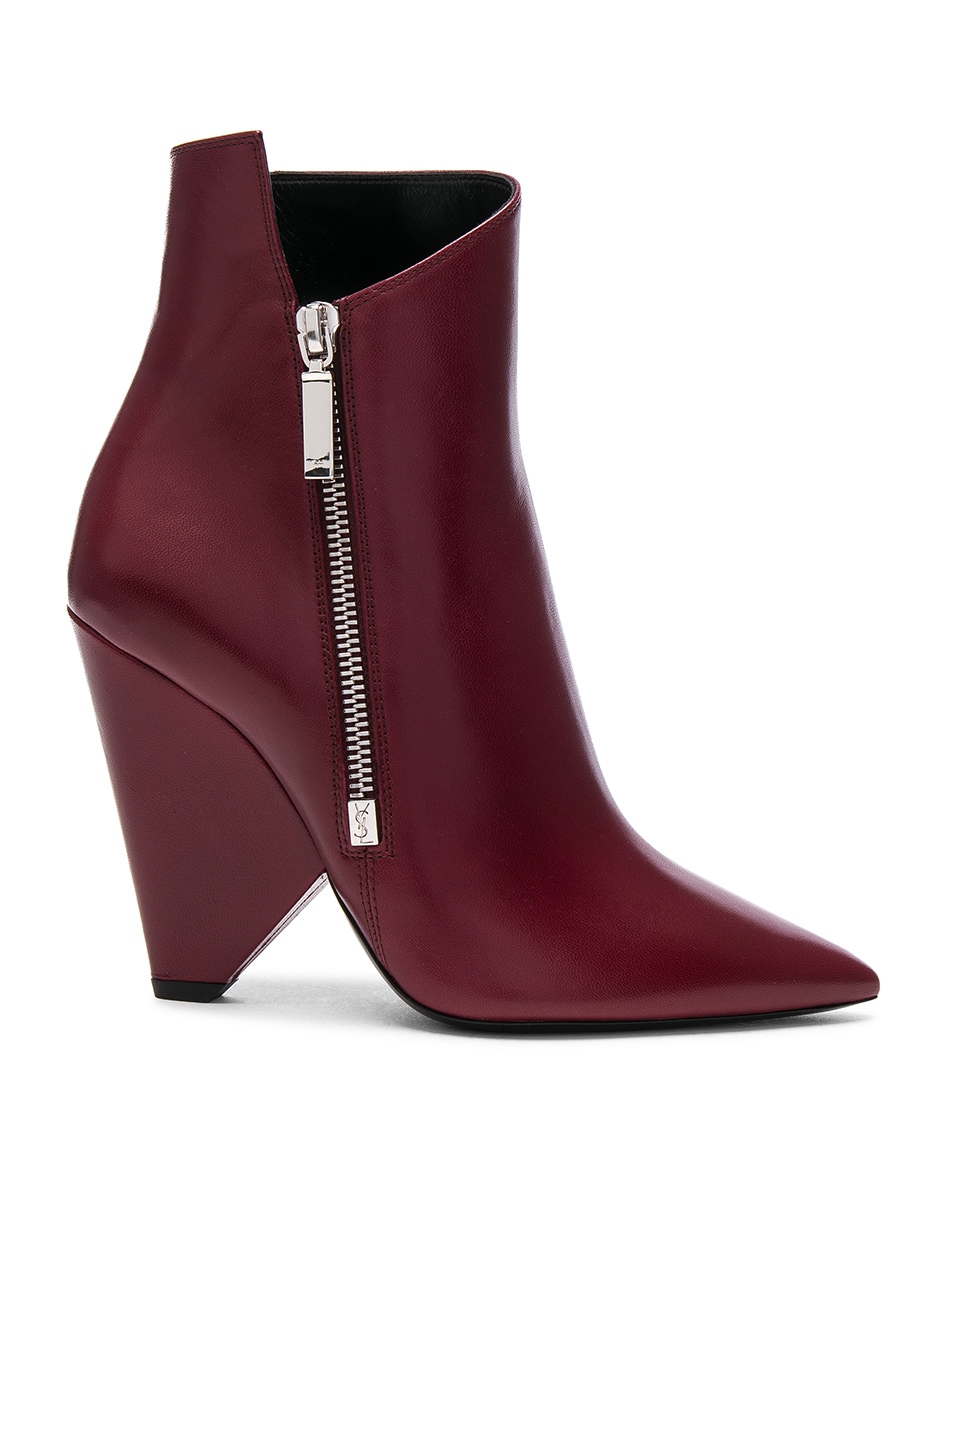 Image 1 of Saint Laurent Leather Niki Booties in French Burgundy